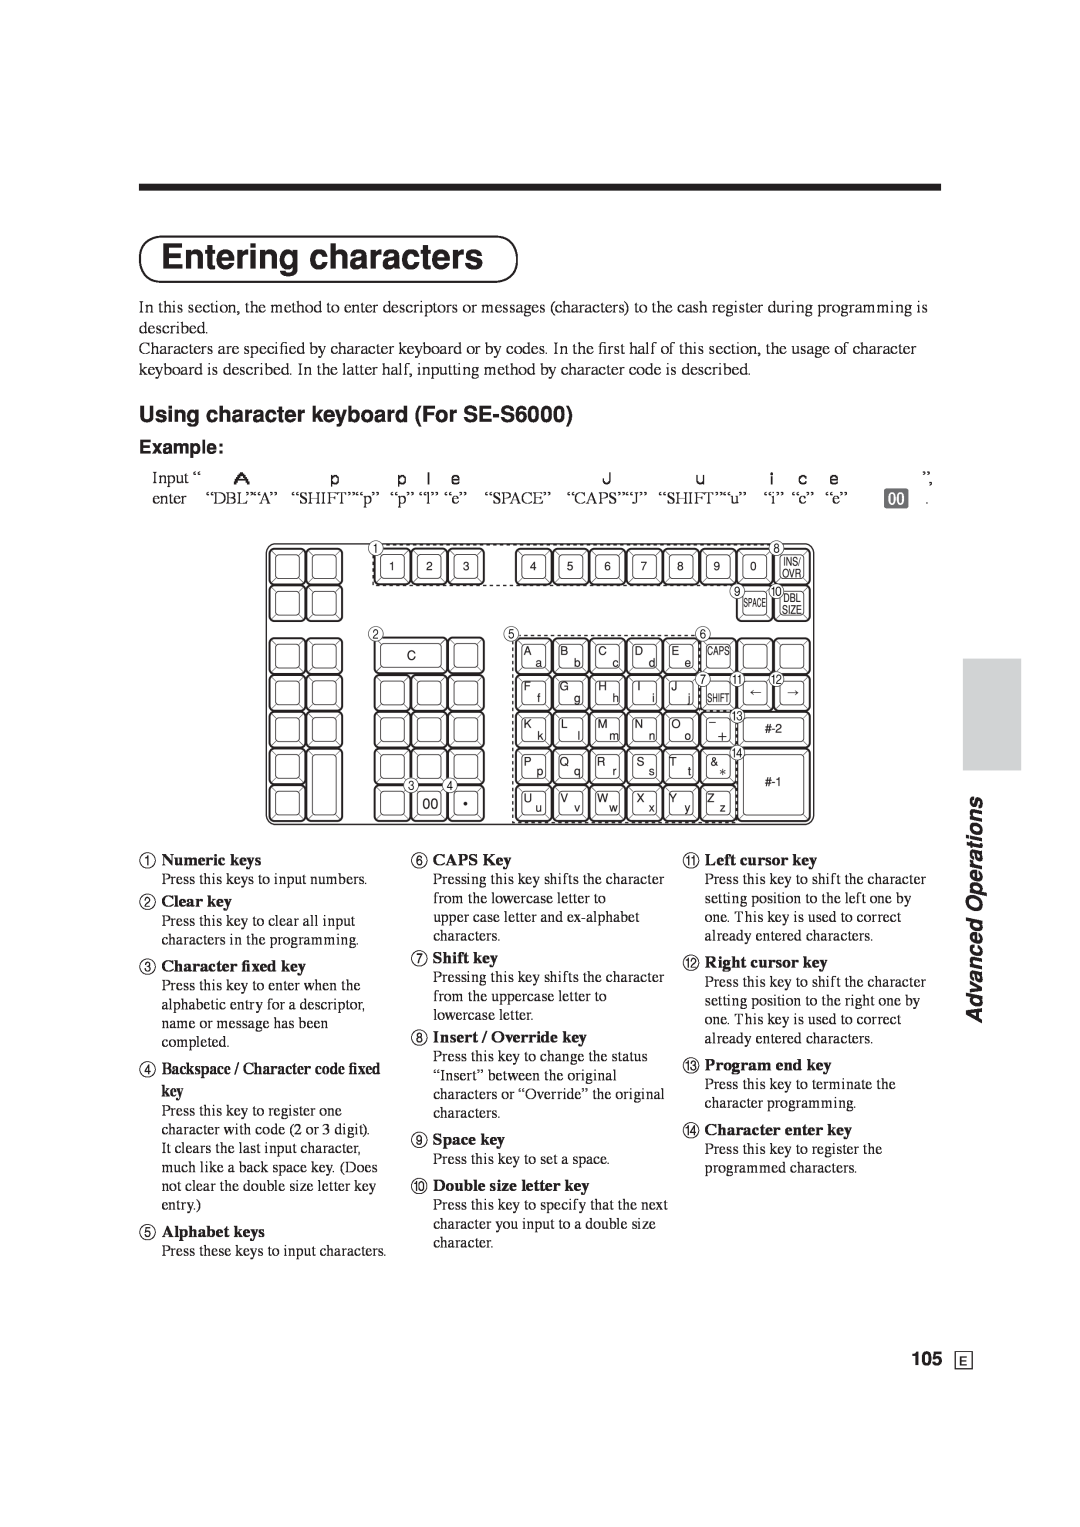 Casio SE-C6000 user manual Entering characters, Using character keyboard For SE-S6000, Advanced Operations, Example 